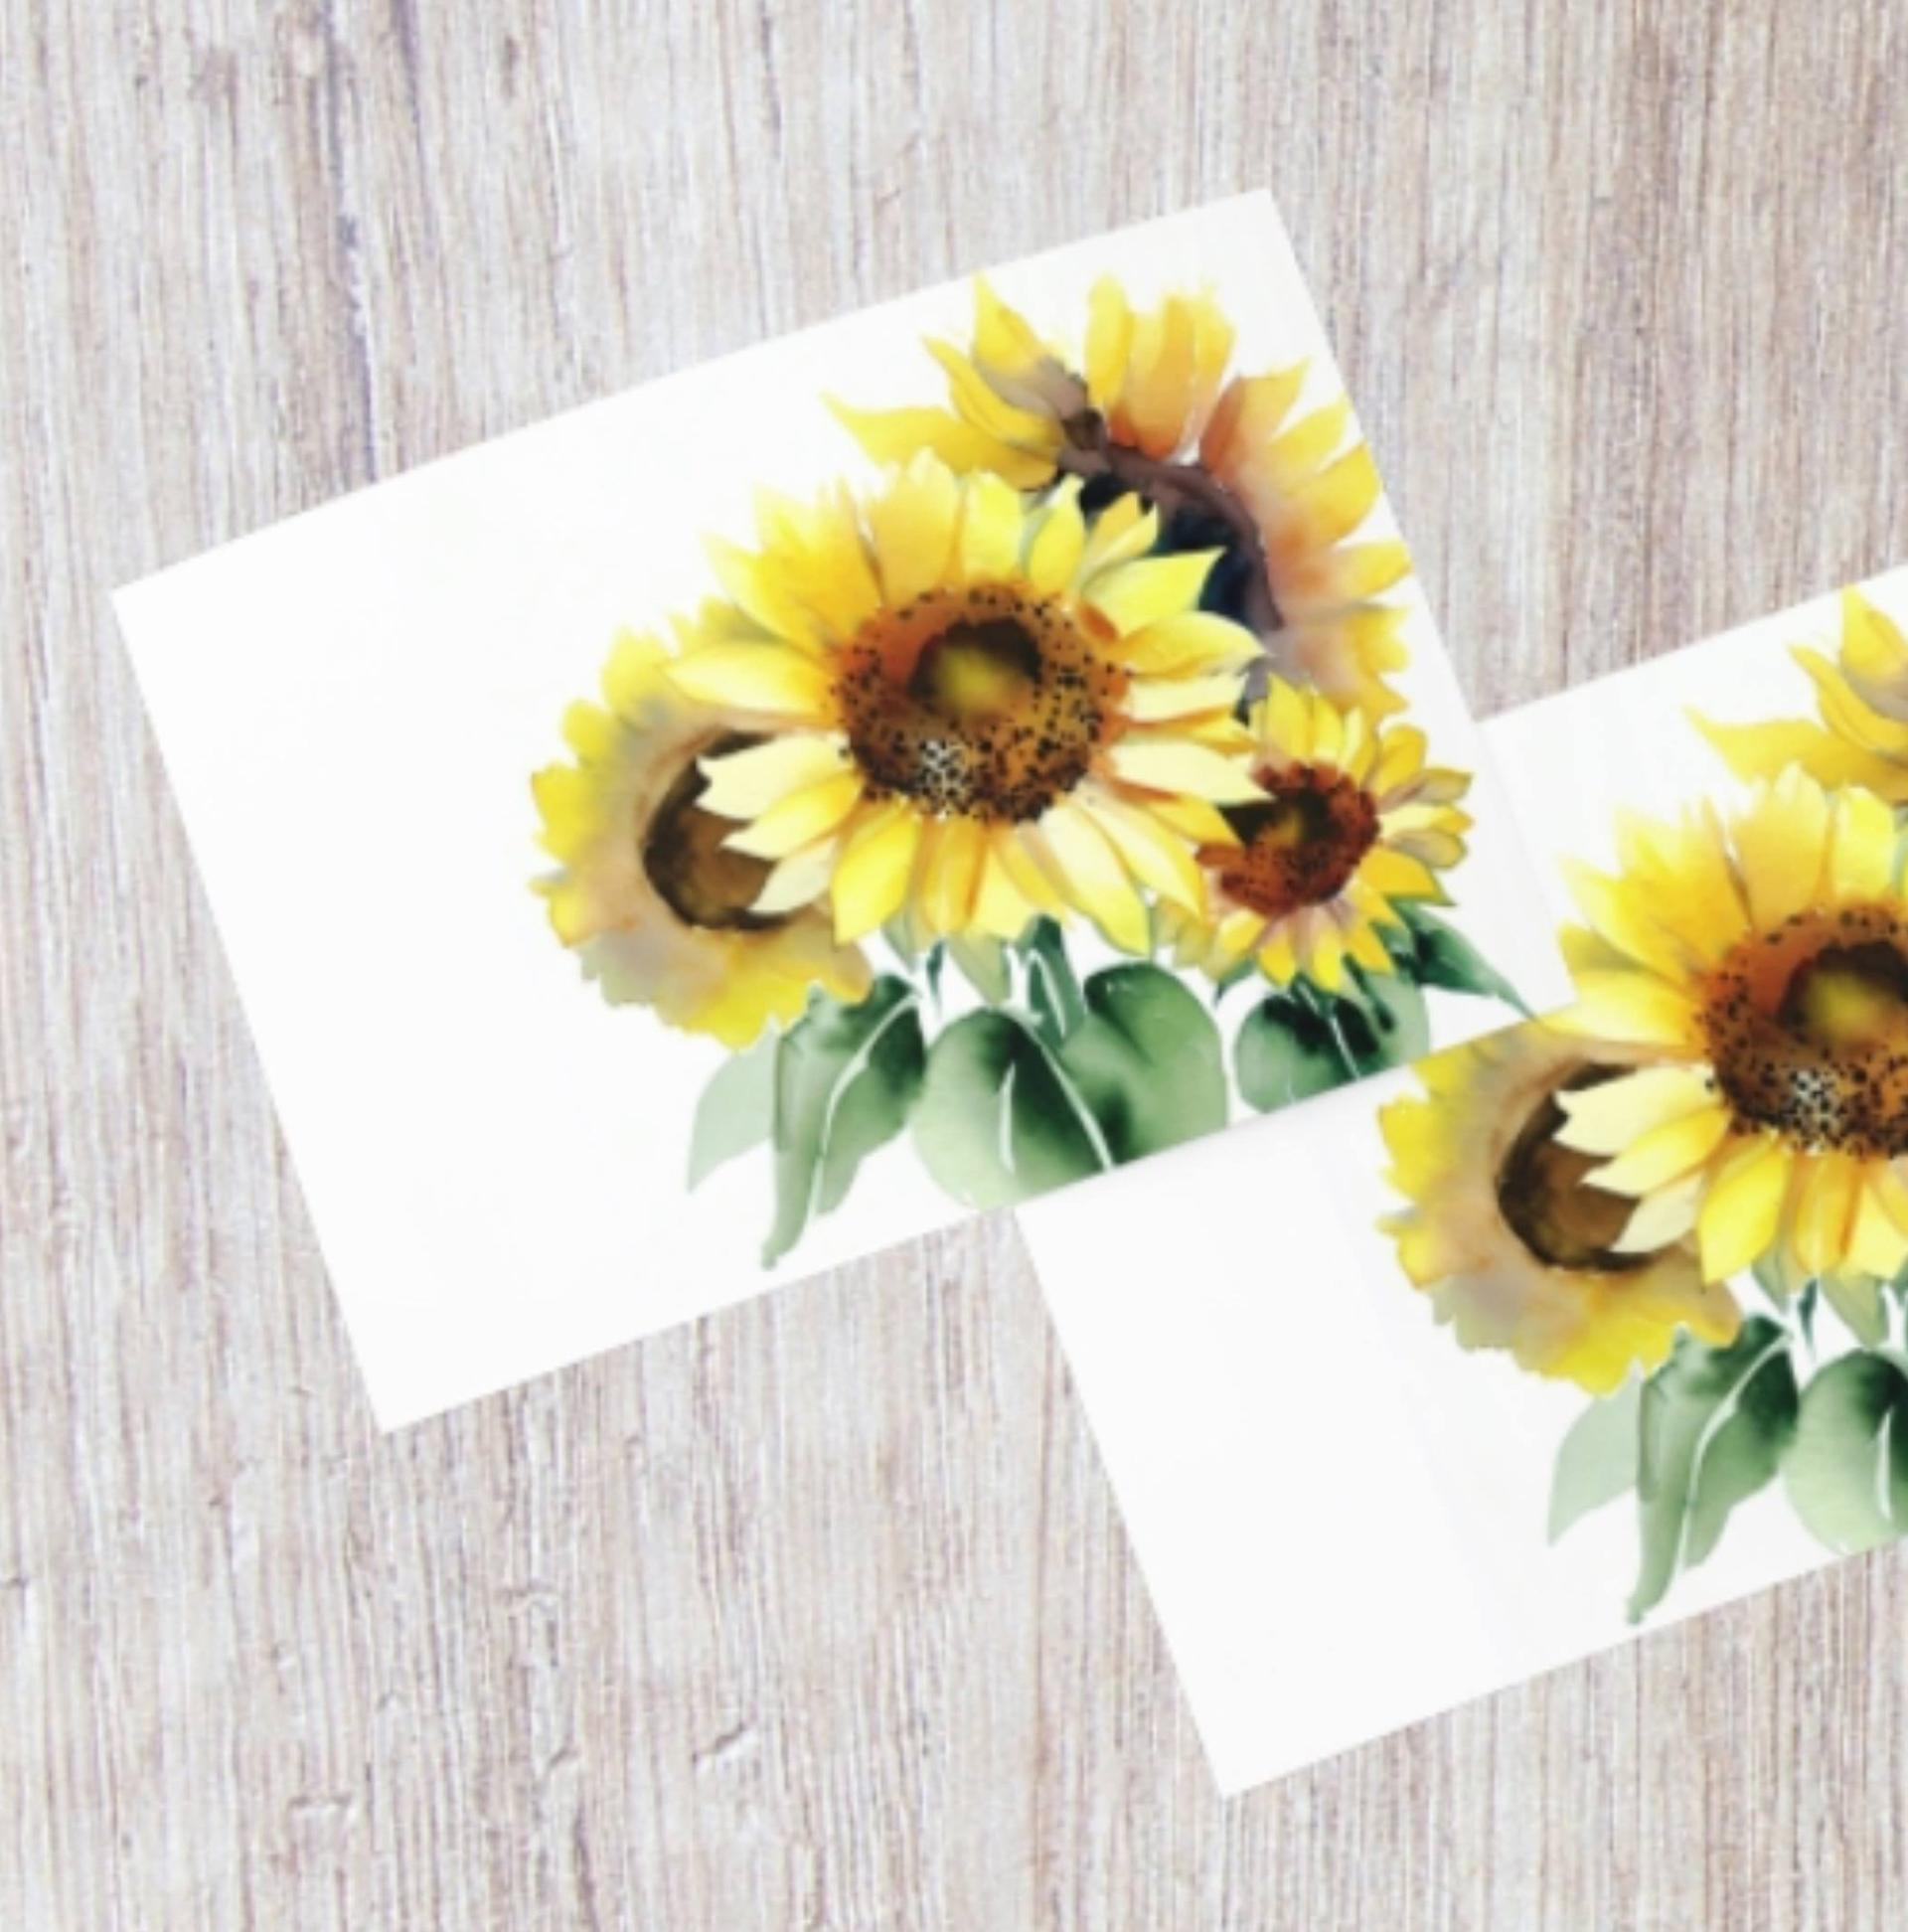 Sunflowers - Single Card or Bulk 10 Pack of Greeting Cards